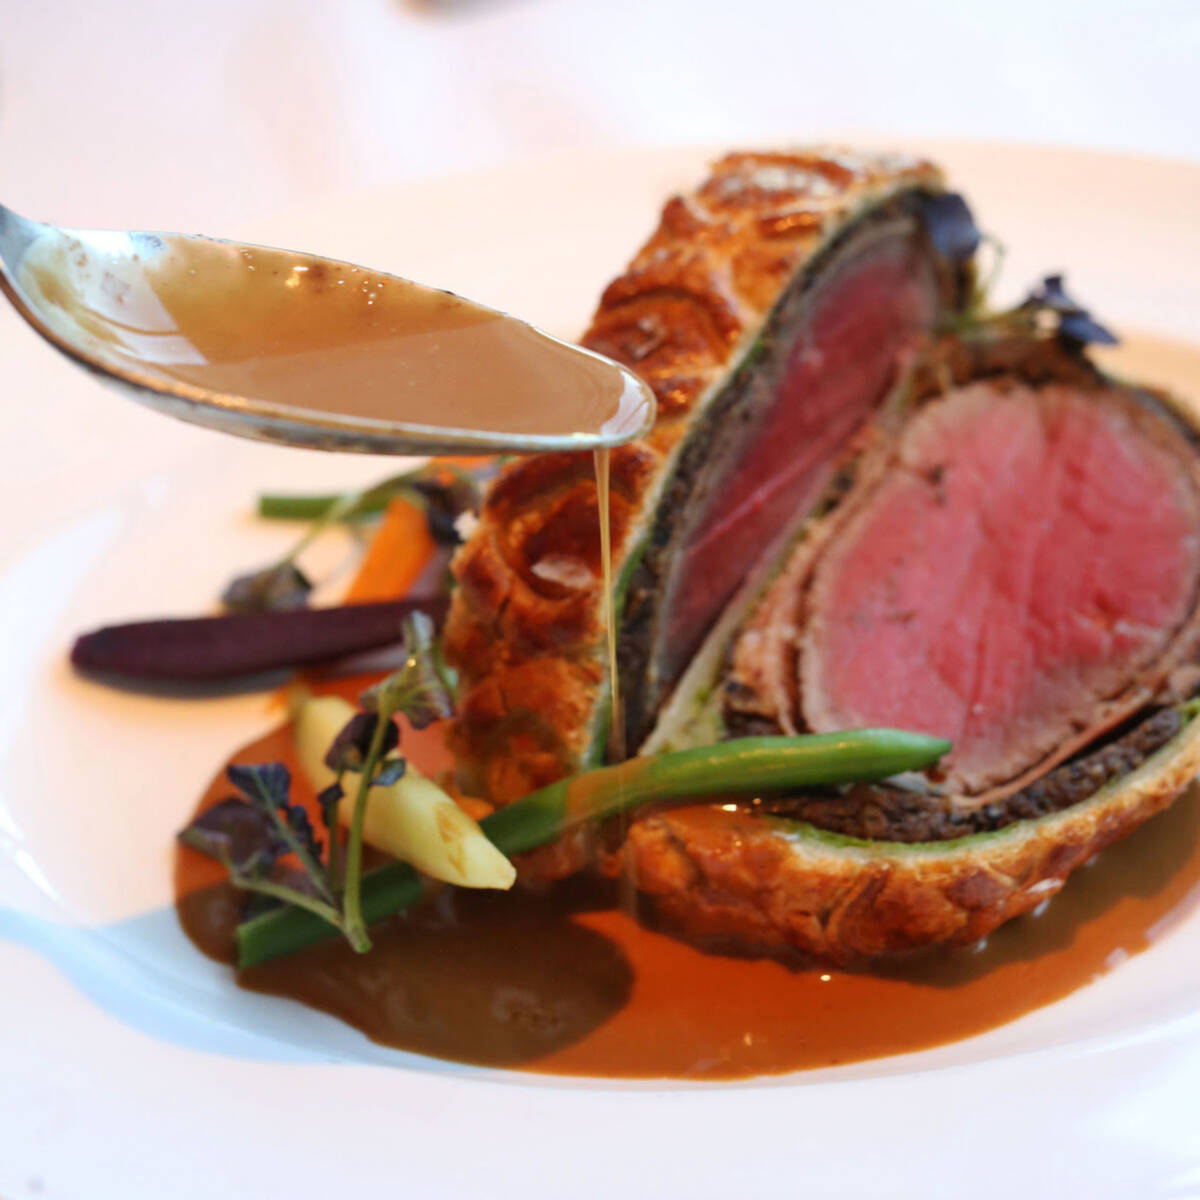 Chateaubriand for two is being served on Christmas Day 2022 at Scotch 80 Prime in The Palms of ...